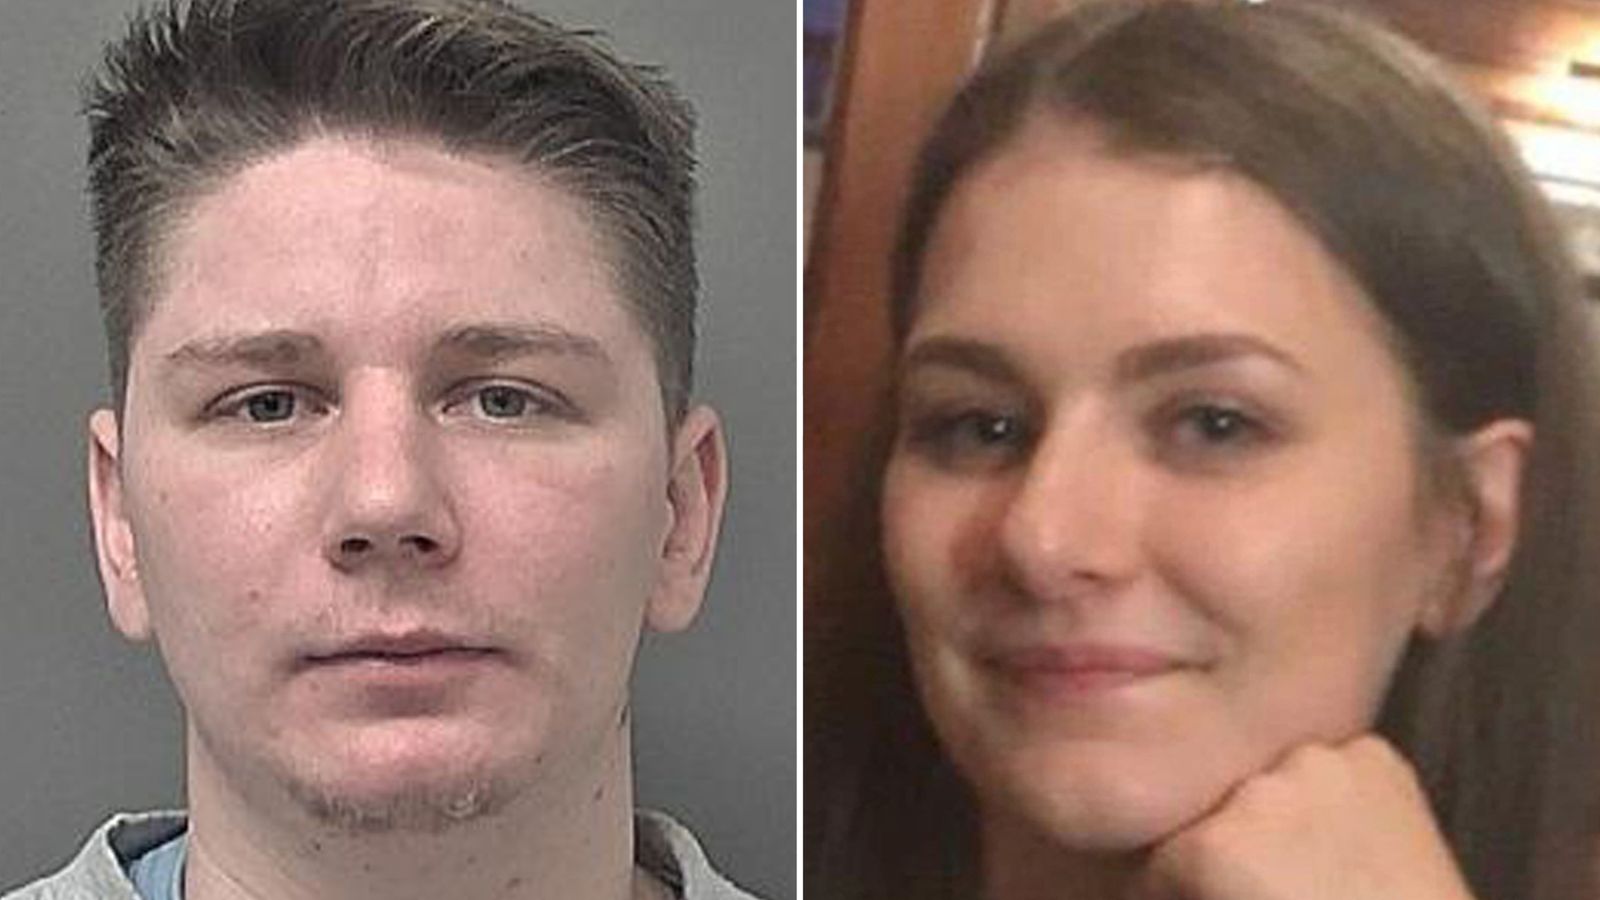 Libby Squire's killer agrees to meet her mother - as new footage shows him laughing during his arrest